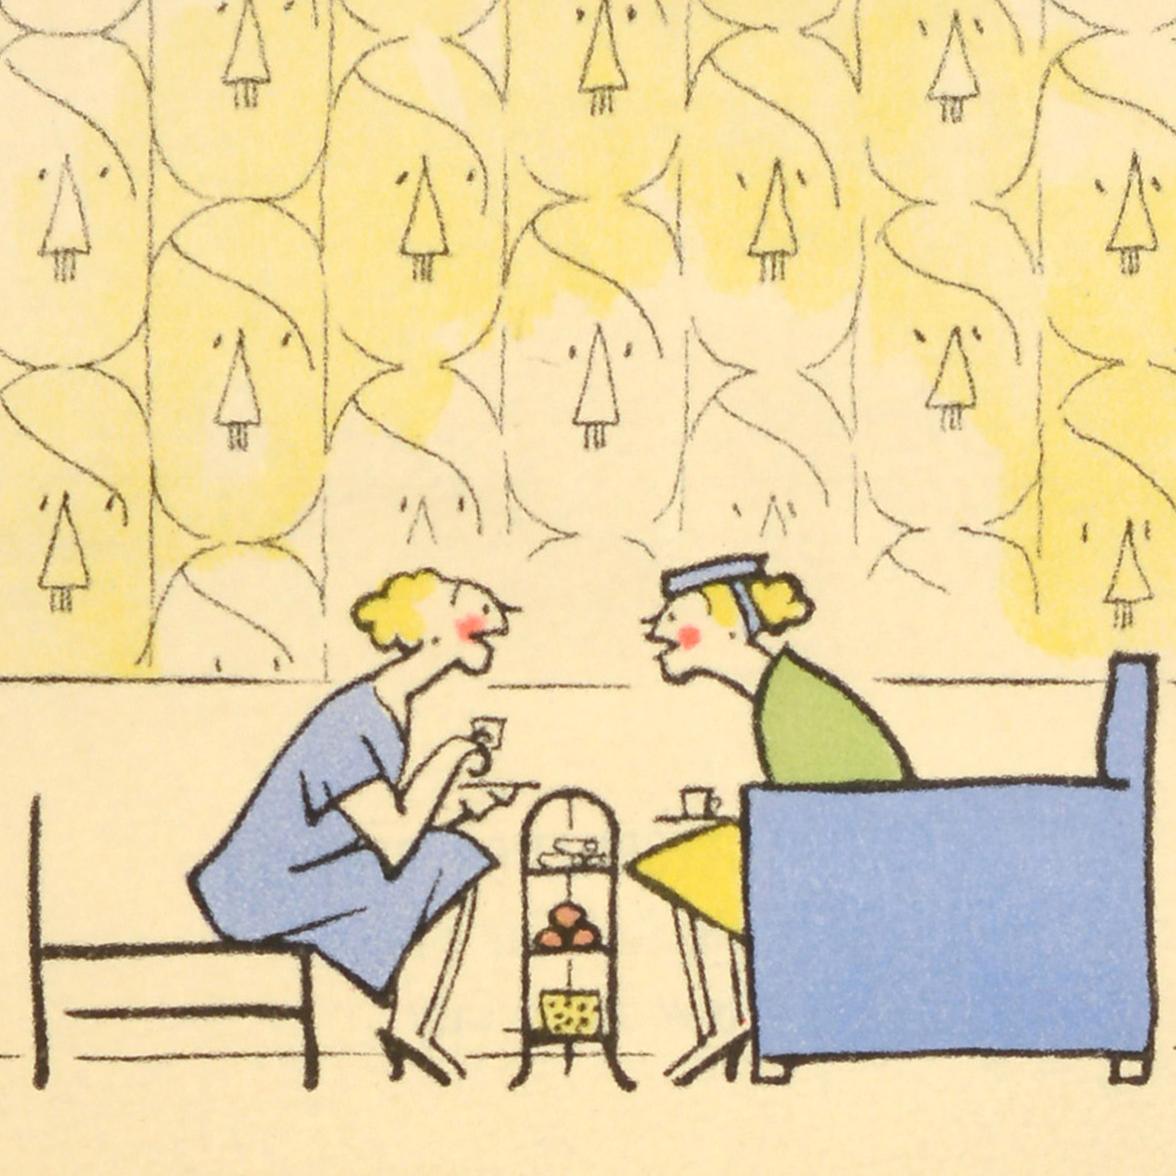 Original Vintage War Poster Careless Talk Costs Lives Walls Have Ears WWII  - Print by Fougasse (Cyril Kenneth Bird)